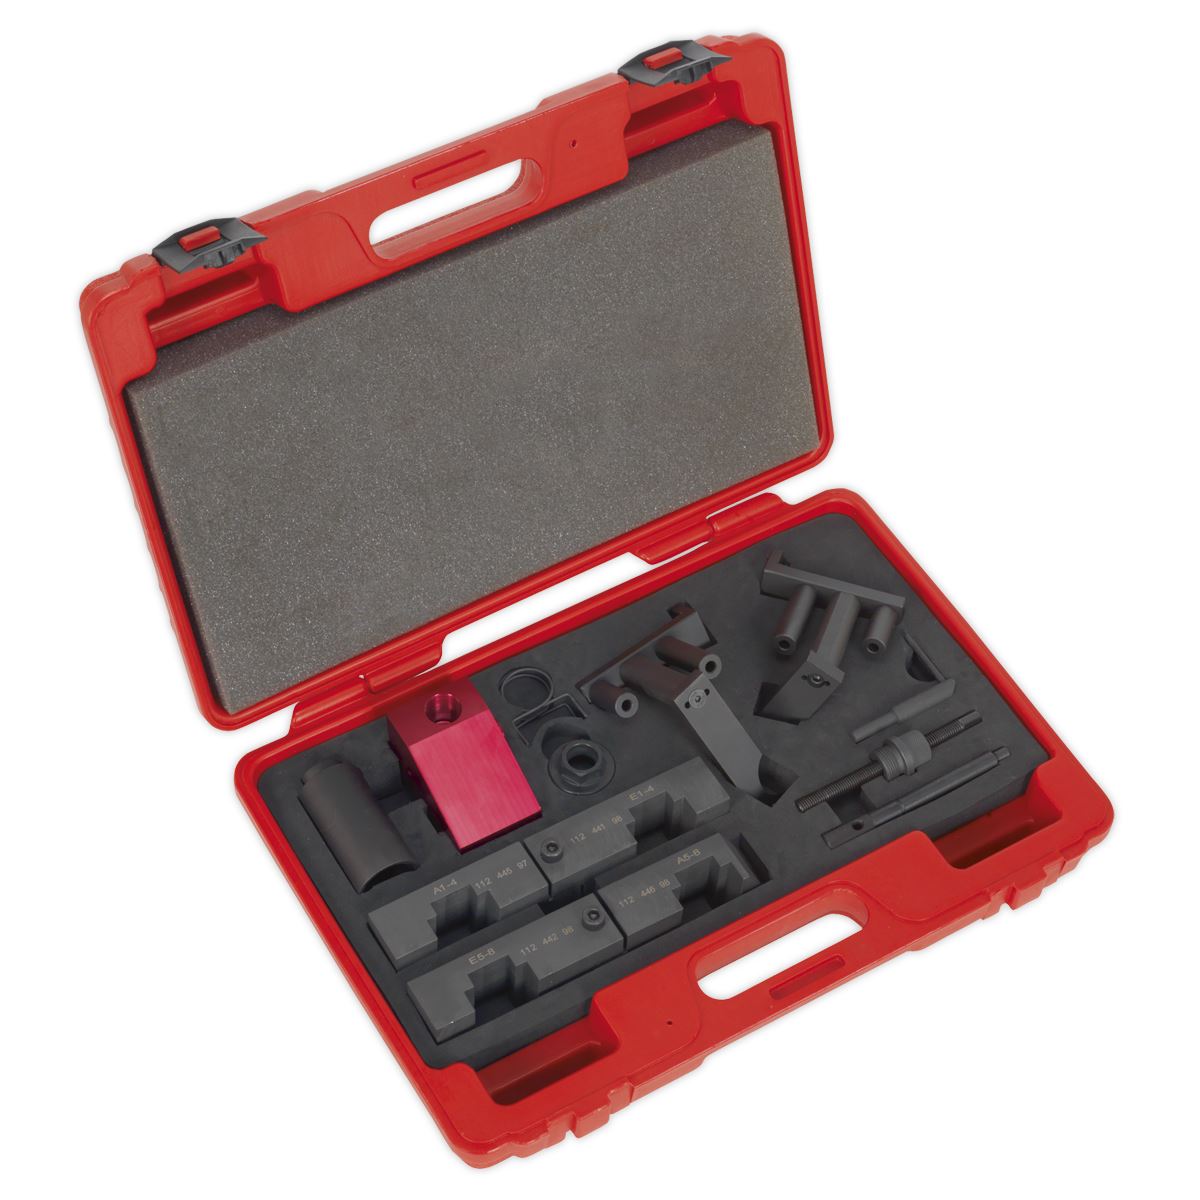 Sealey Petrol Engine Timing Tool Kit - for BMW, Land Rover, Morgan - Chain Drive